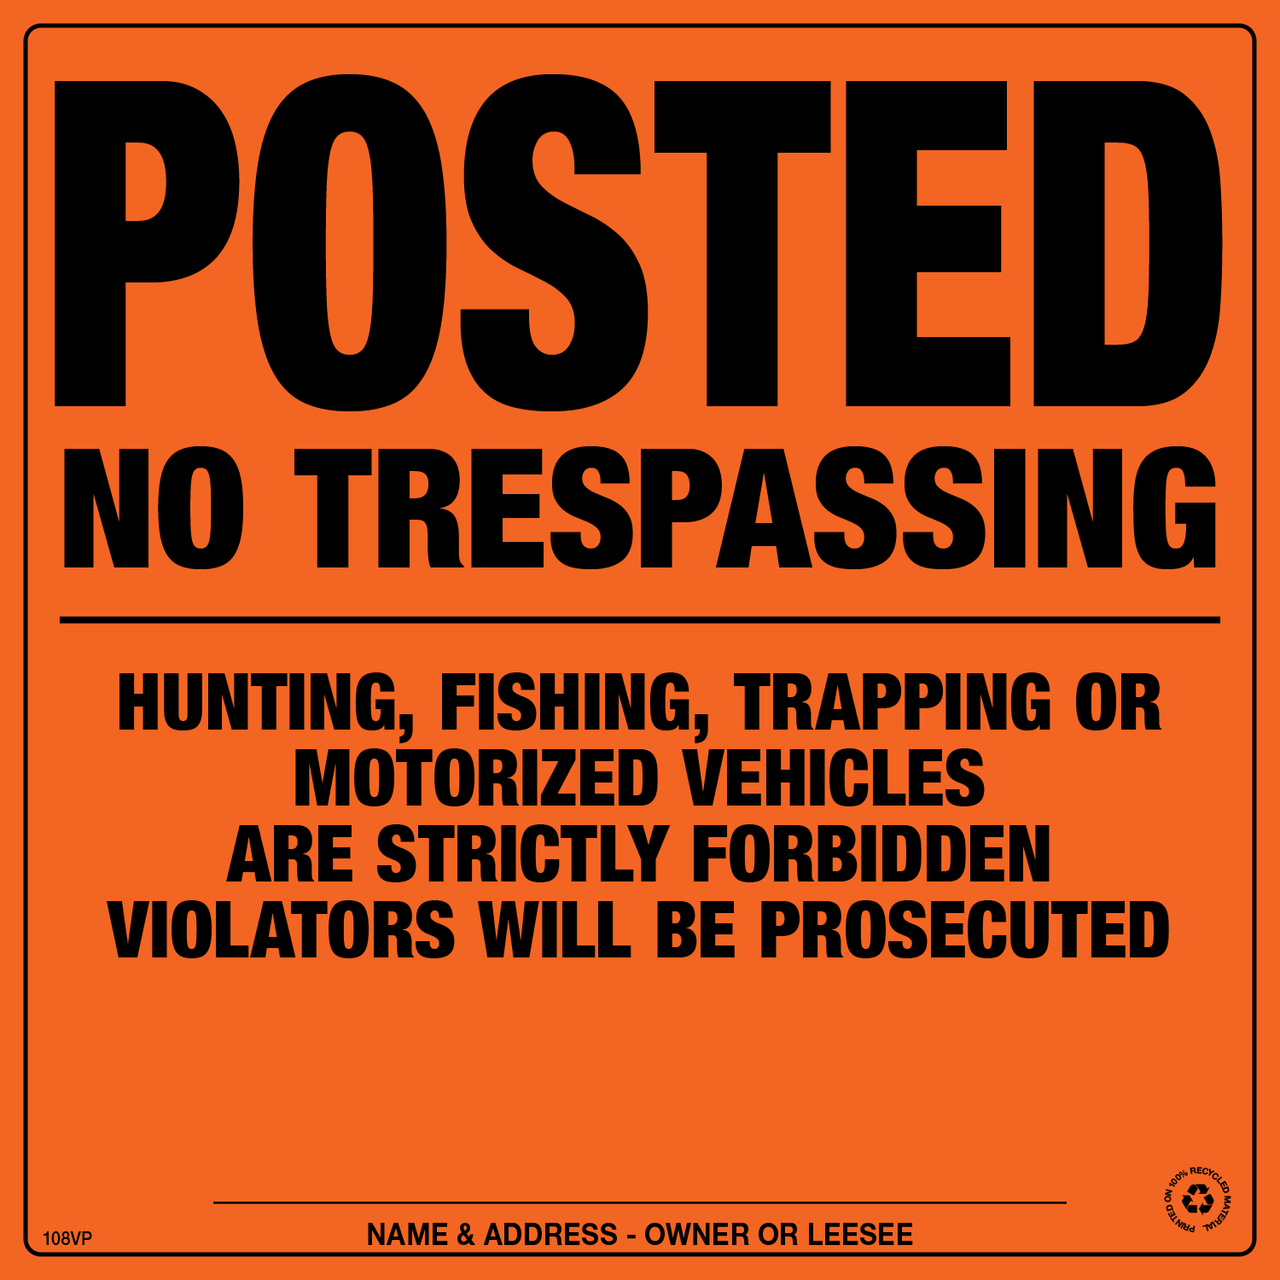 Posted No Trespassing Signs - Orange Aluminum - Pack of 25